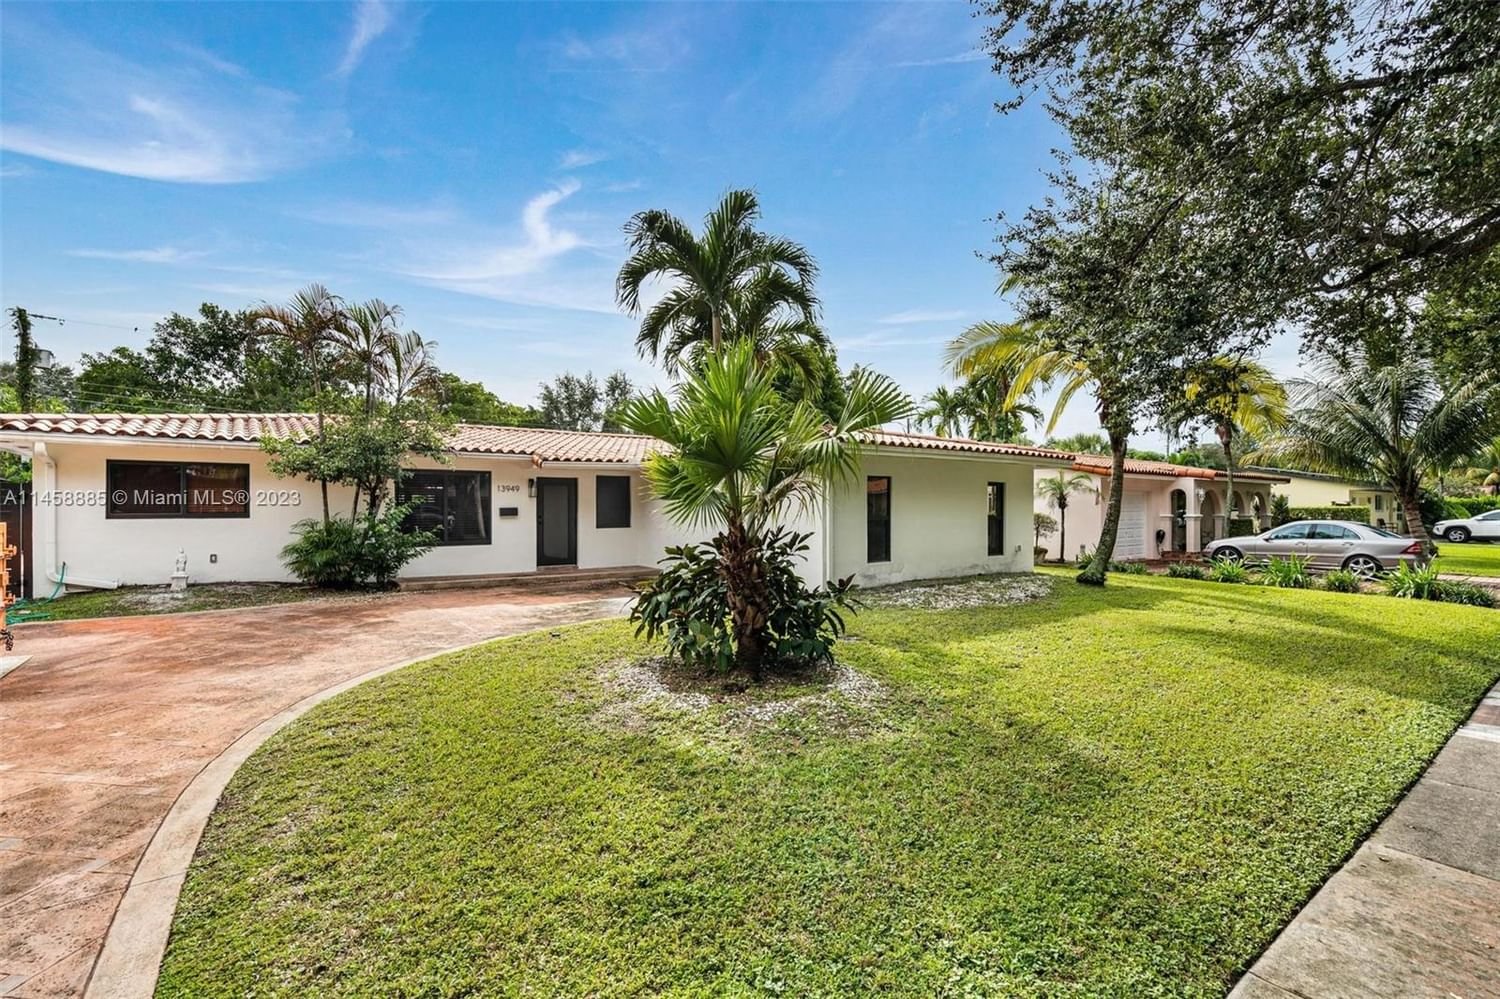 Real estate property located at 13949 Lake George Ct, Miami-Dade County, Miami Lakes, FL